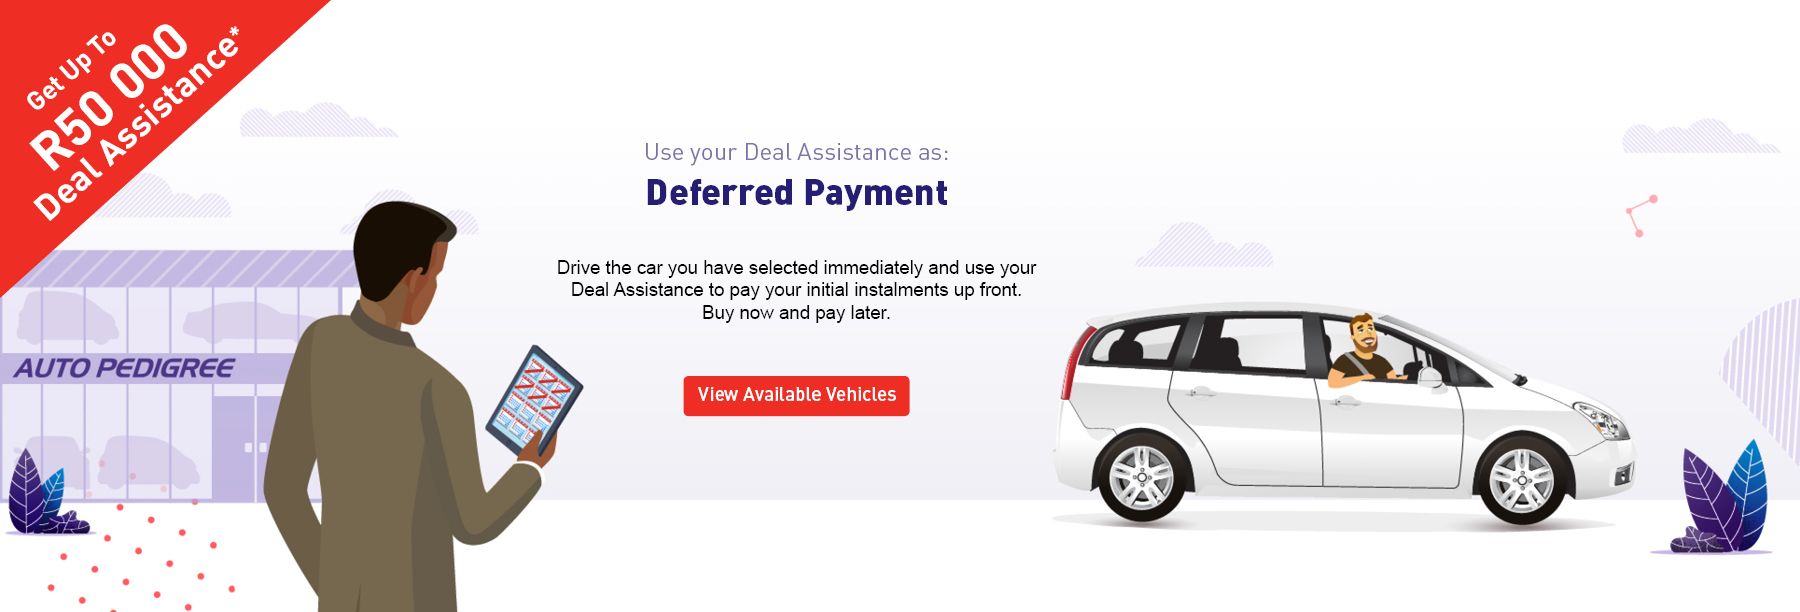  Example of how the deal assistance deferred payment option works